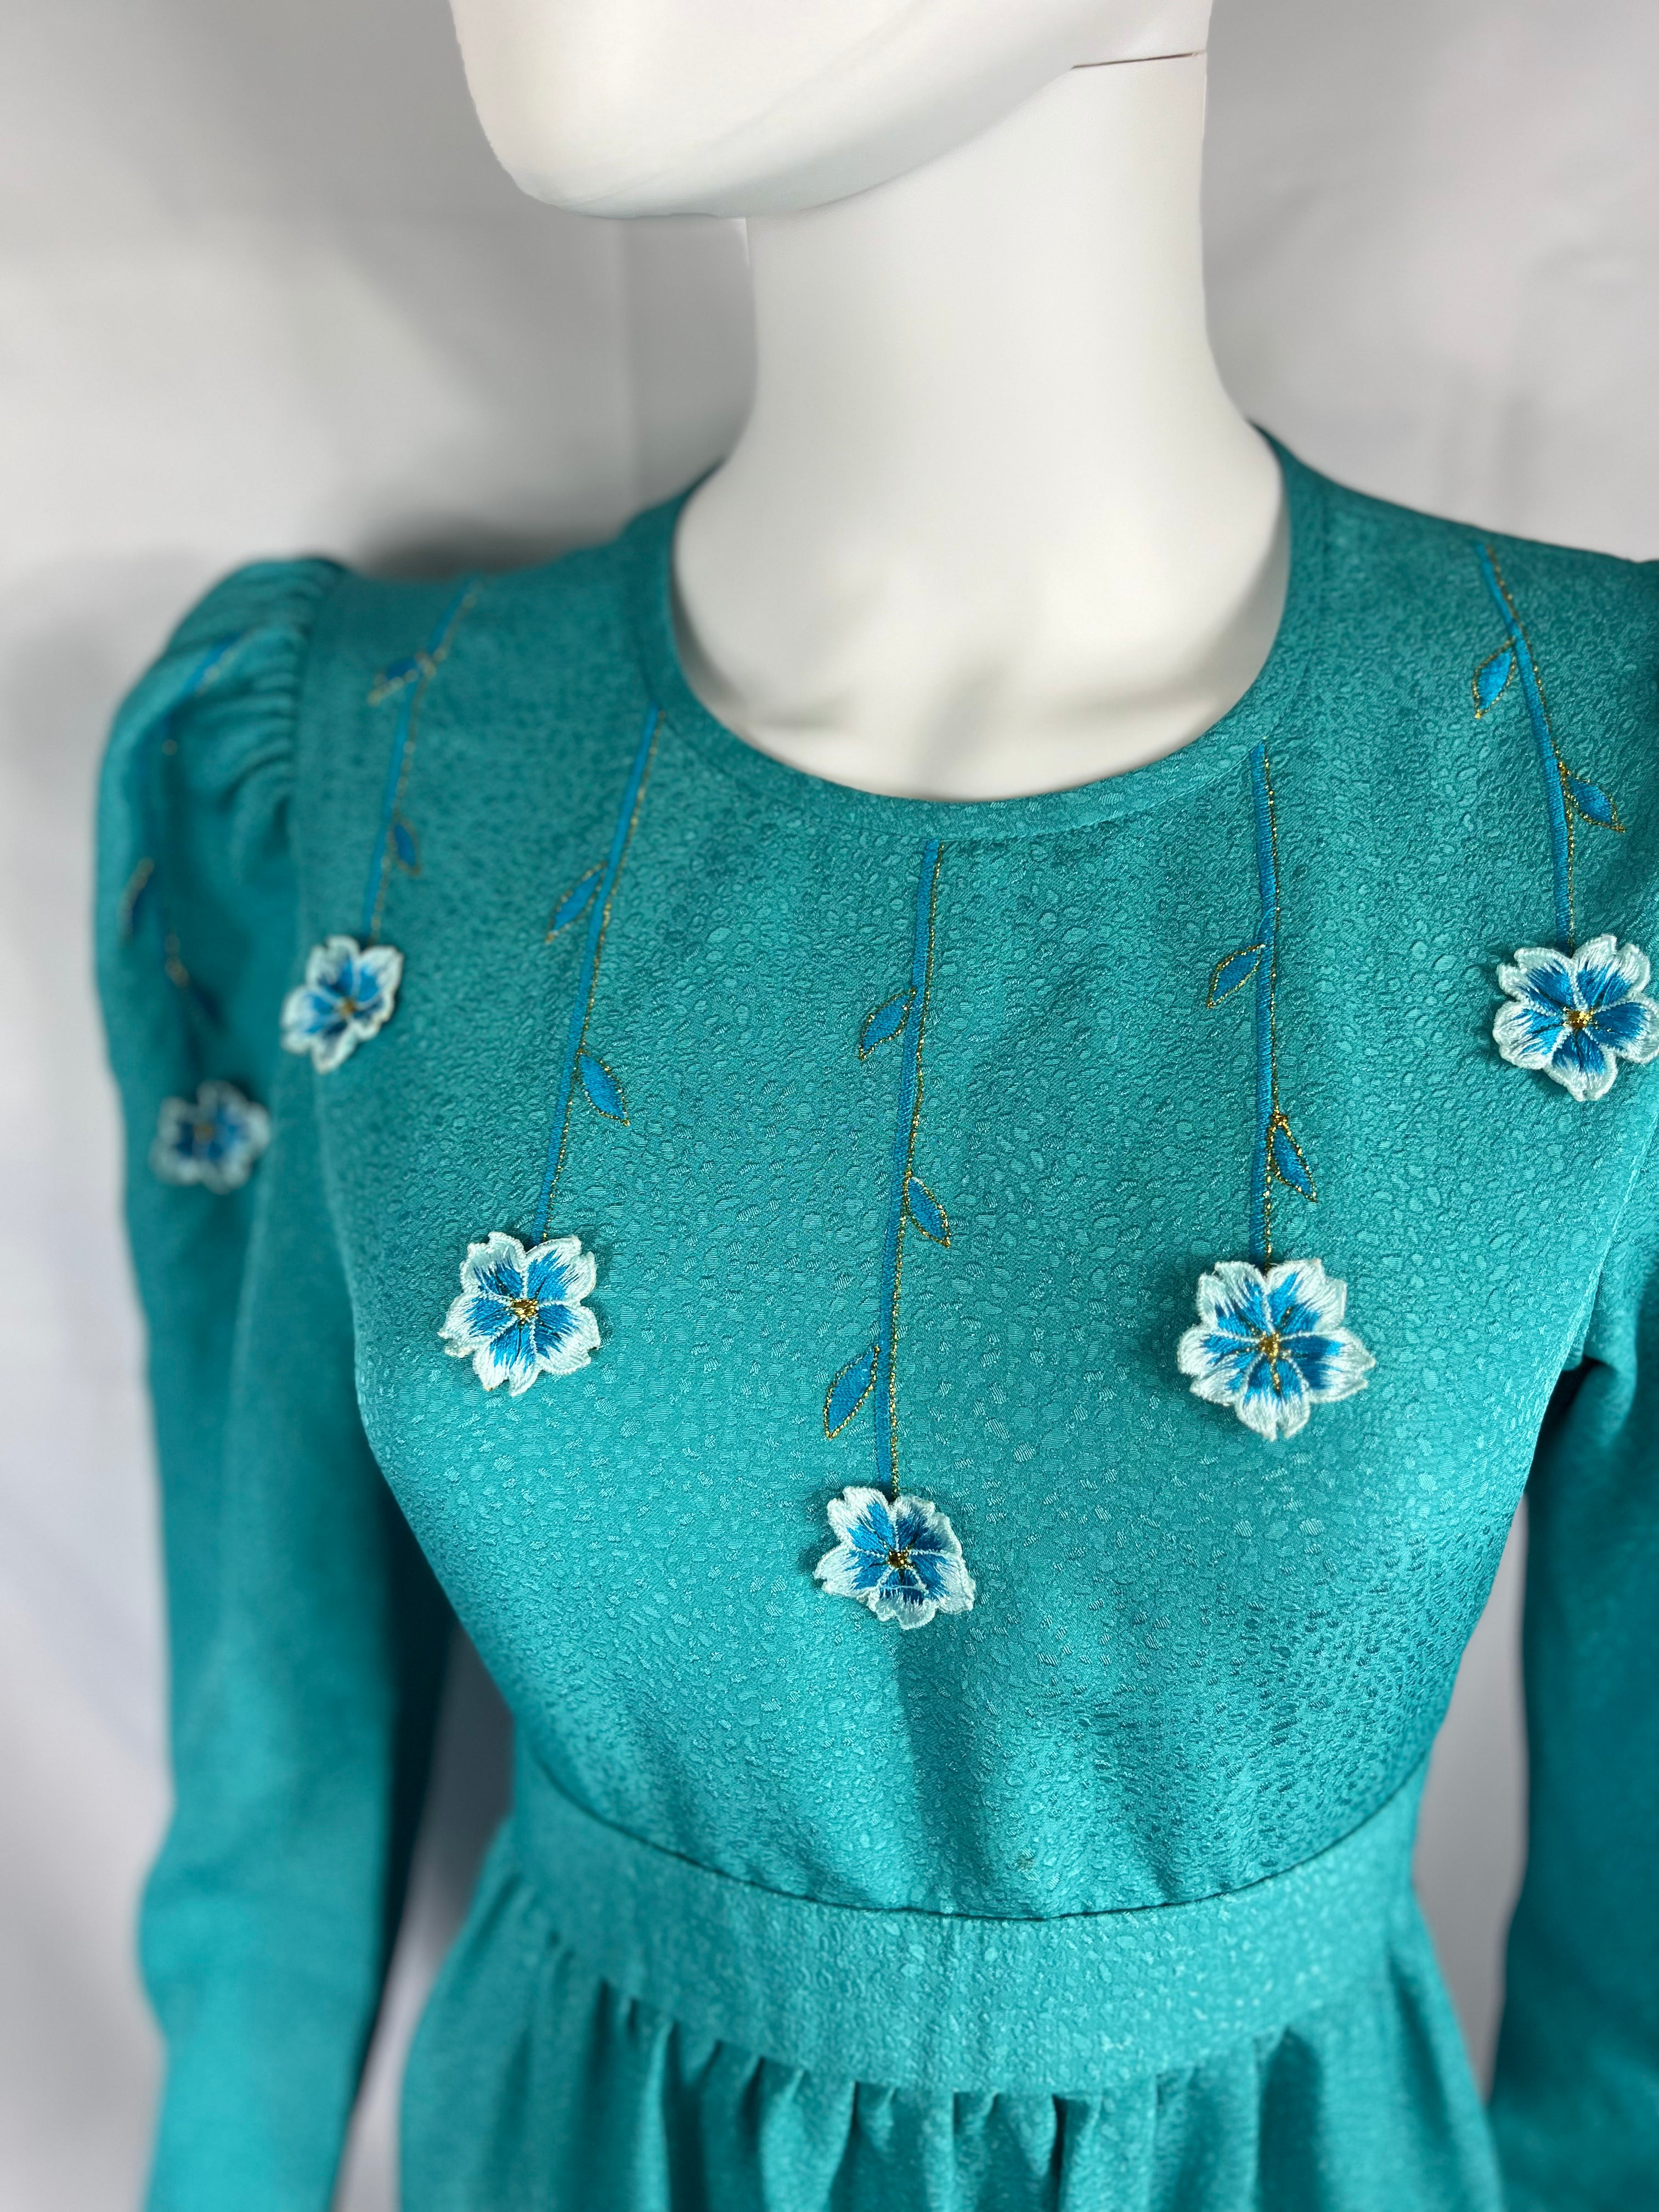 1970's Blue Ruffle Dress with Flower Appliques